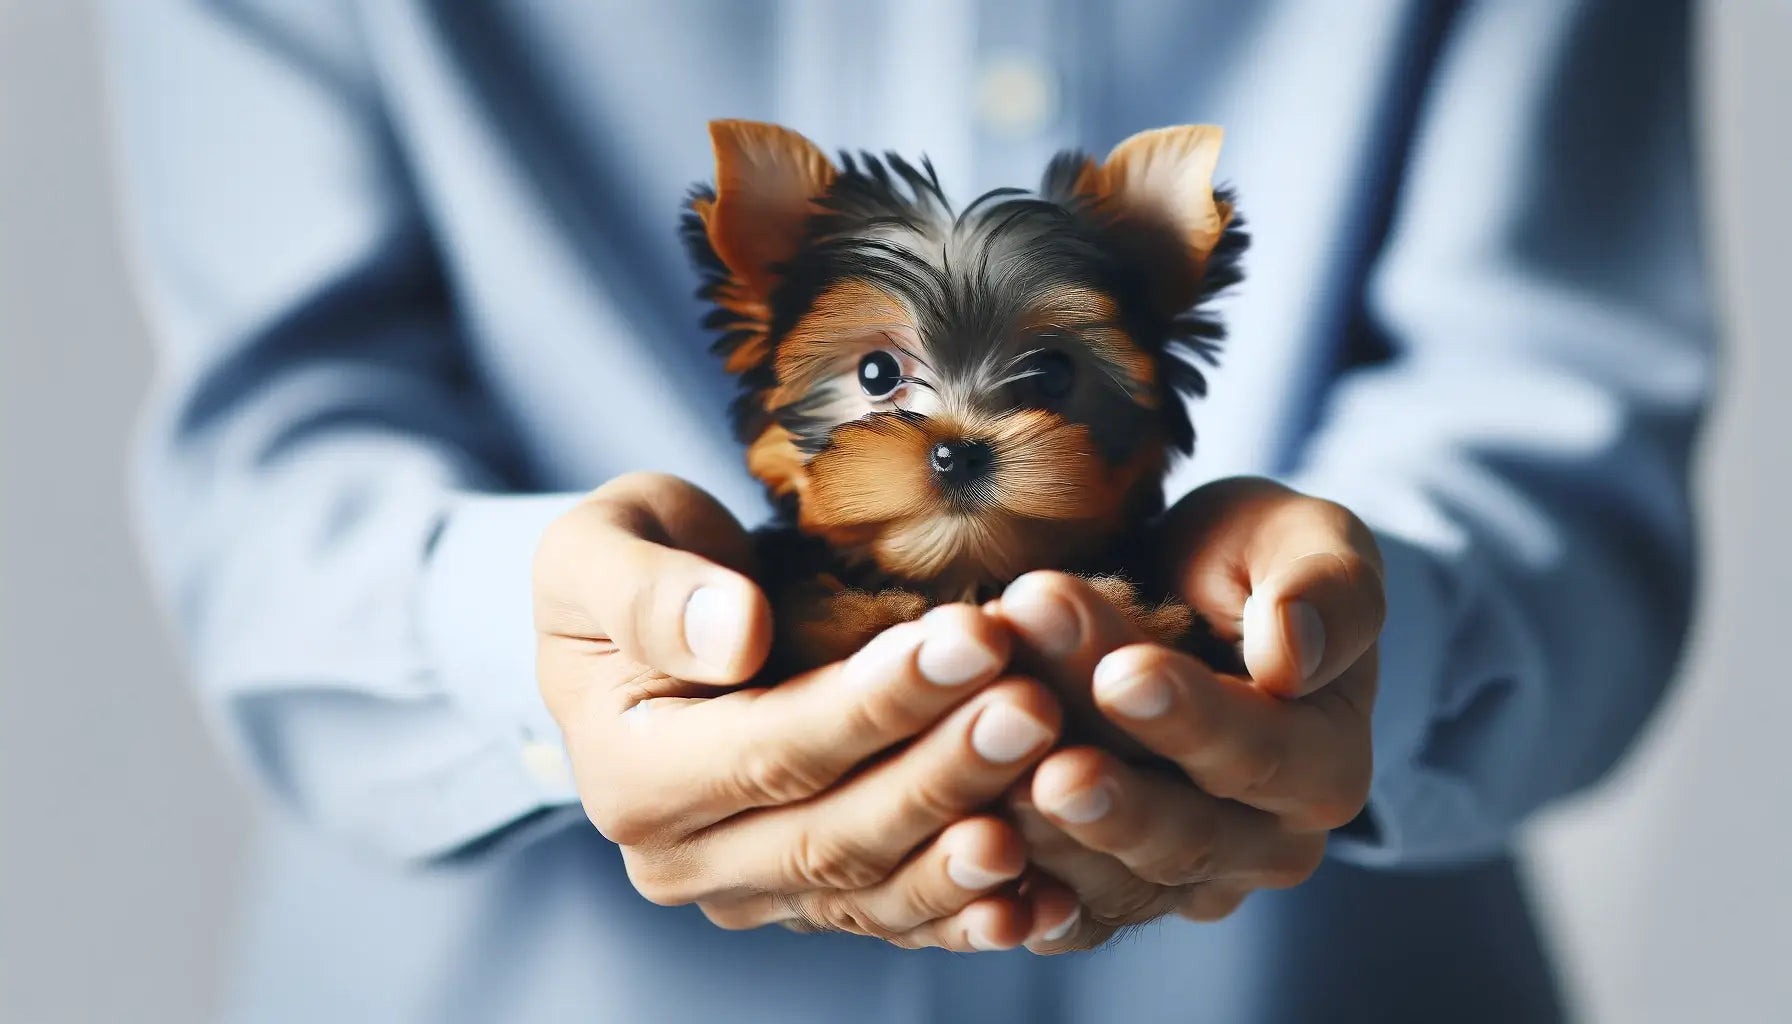 A Teacup Yorkie highlighting the breed's incredibly small size.